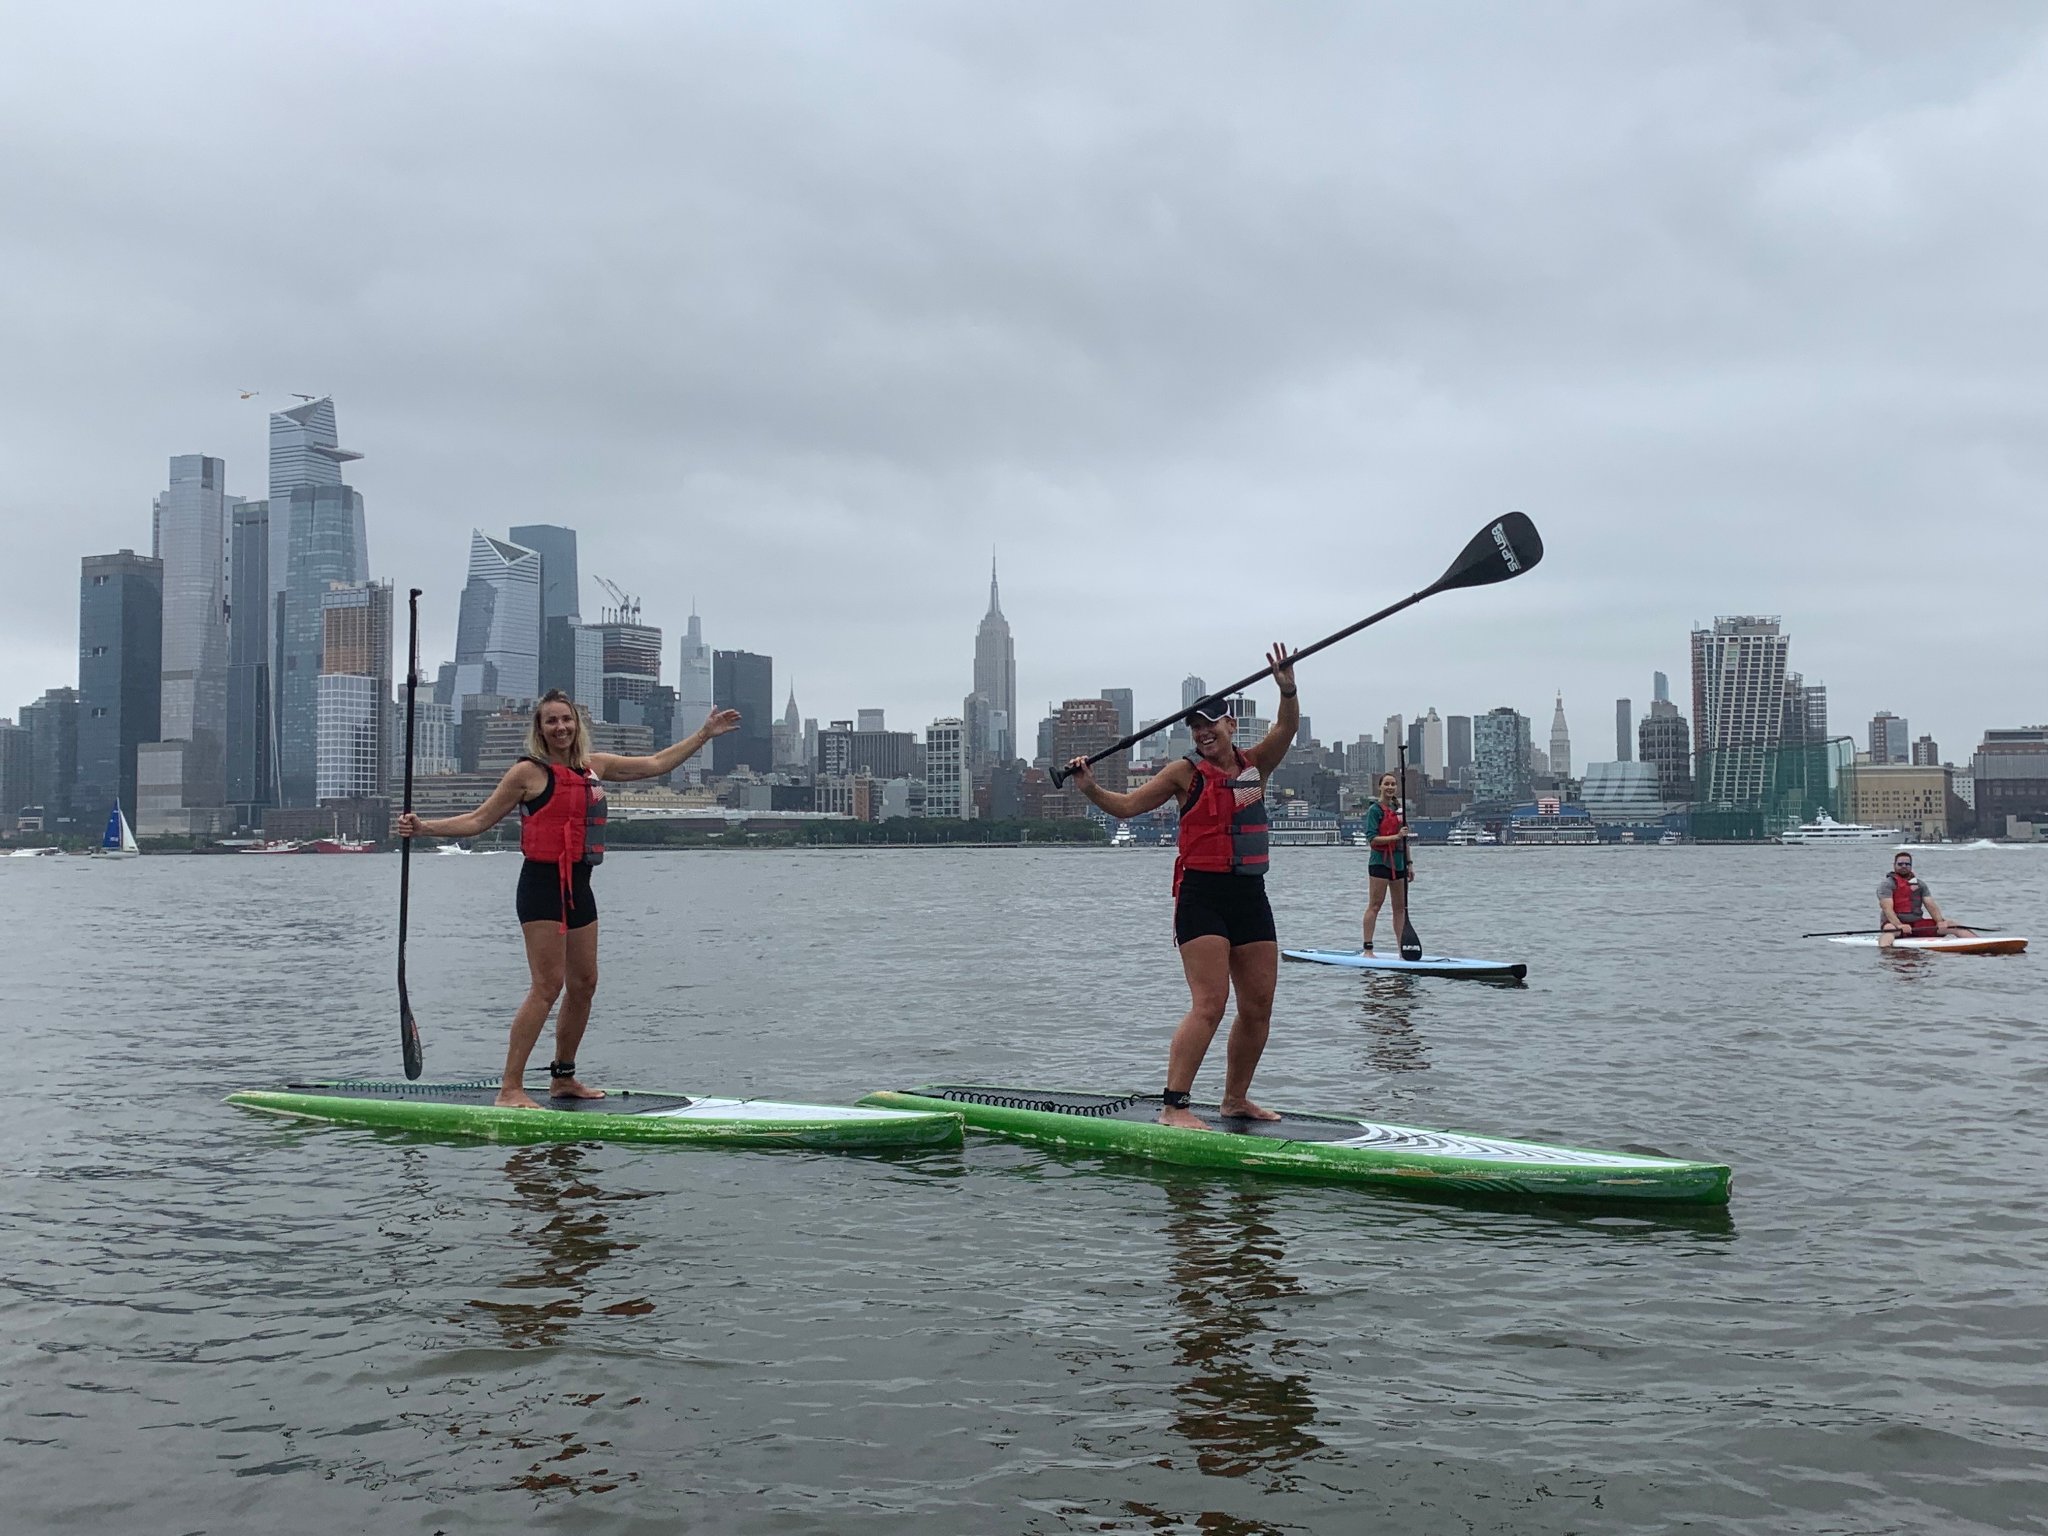 group paddle boarding on the Hudson River with the new york skyline in the background